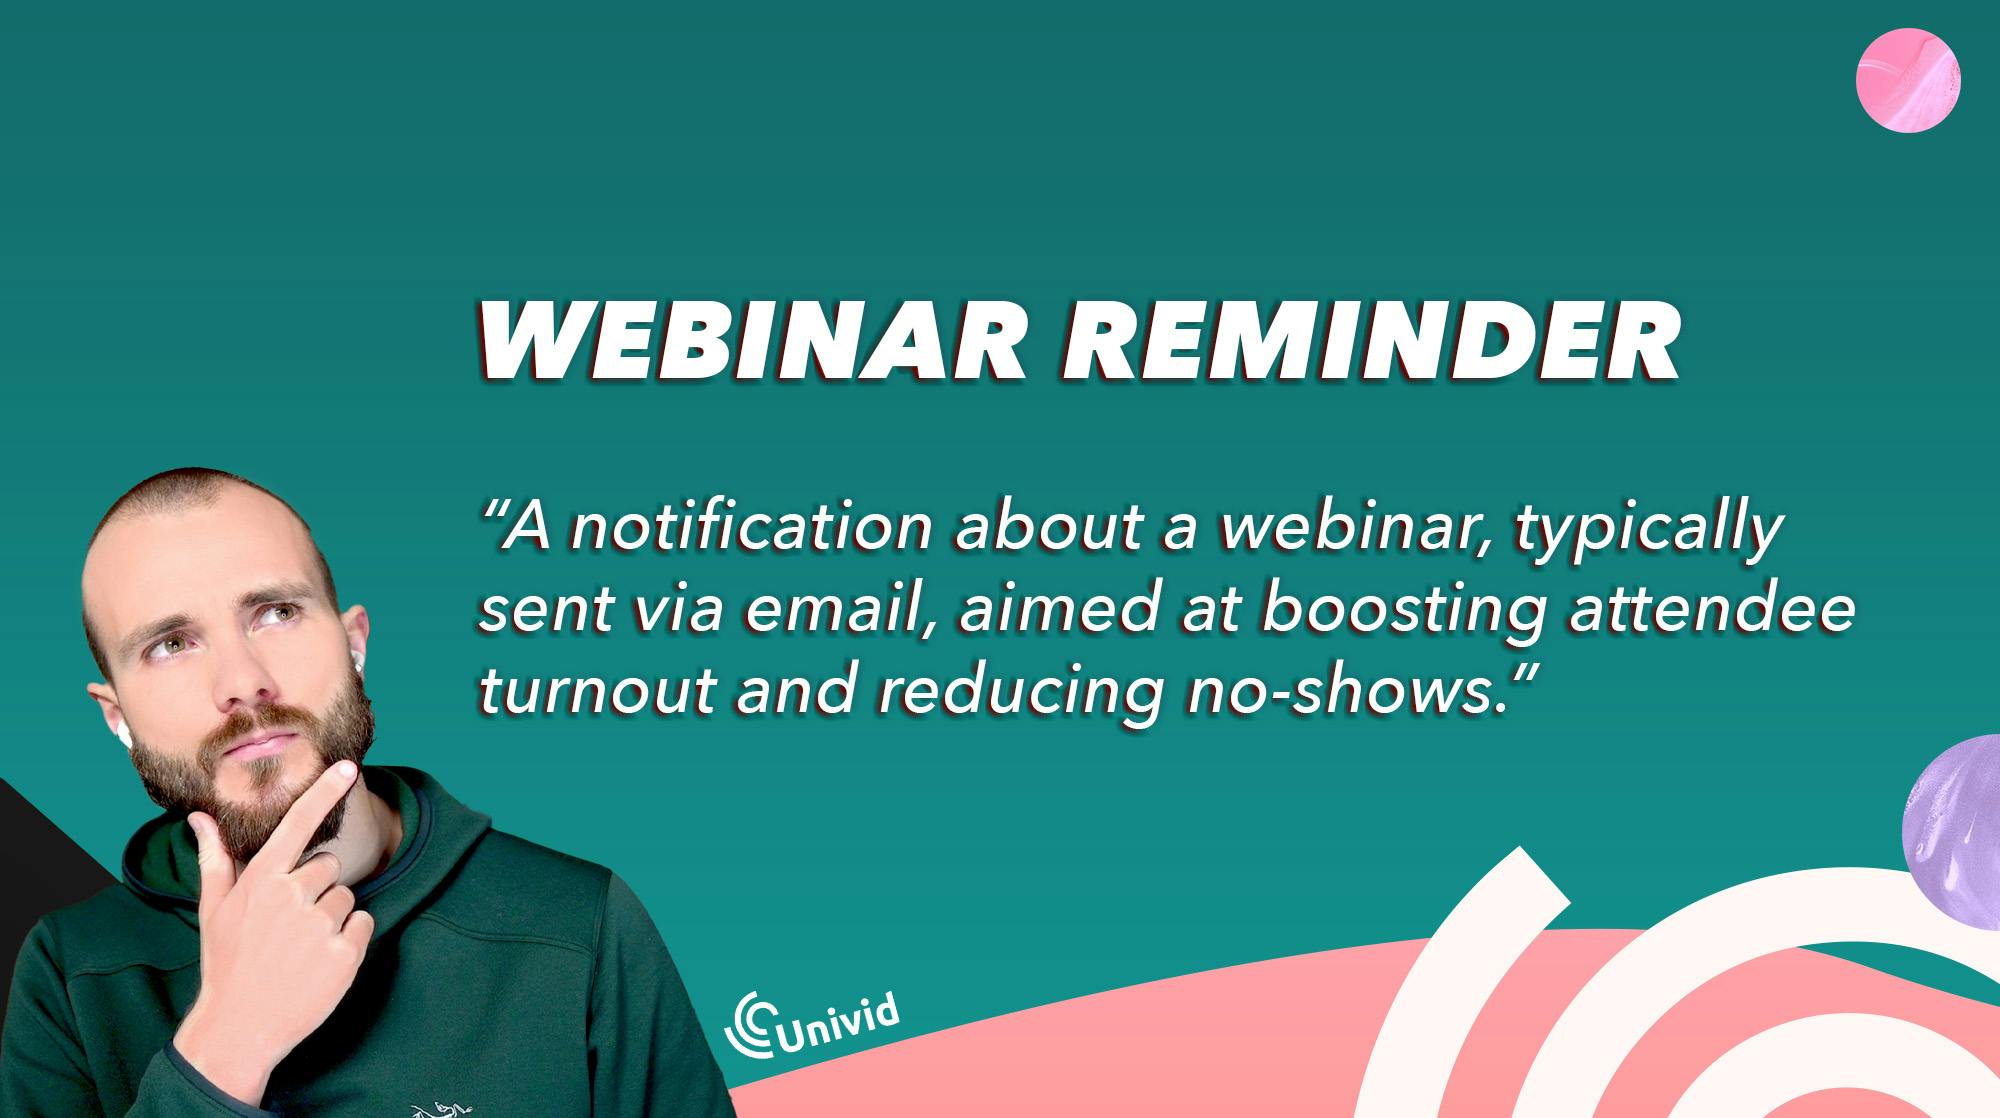 What is a webinar reminder?